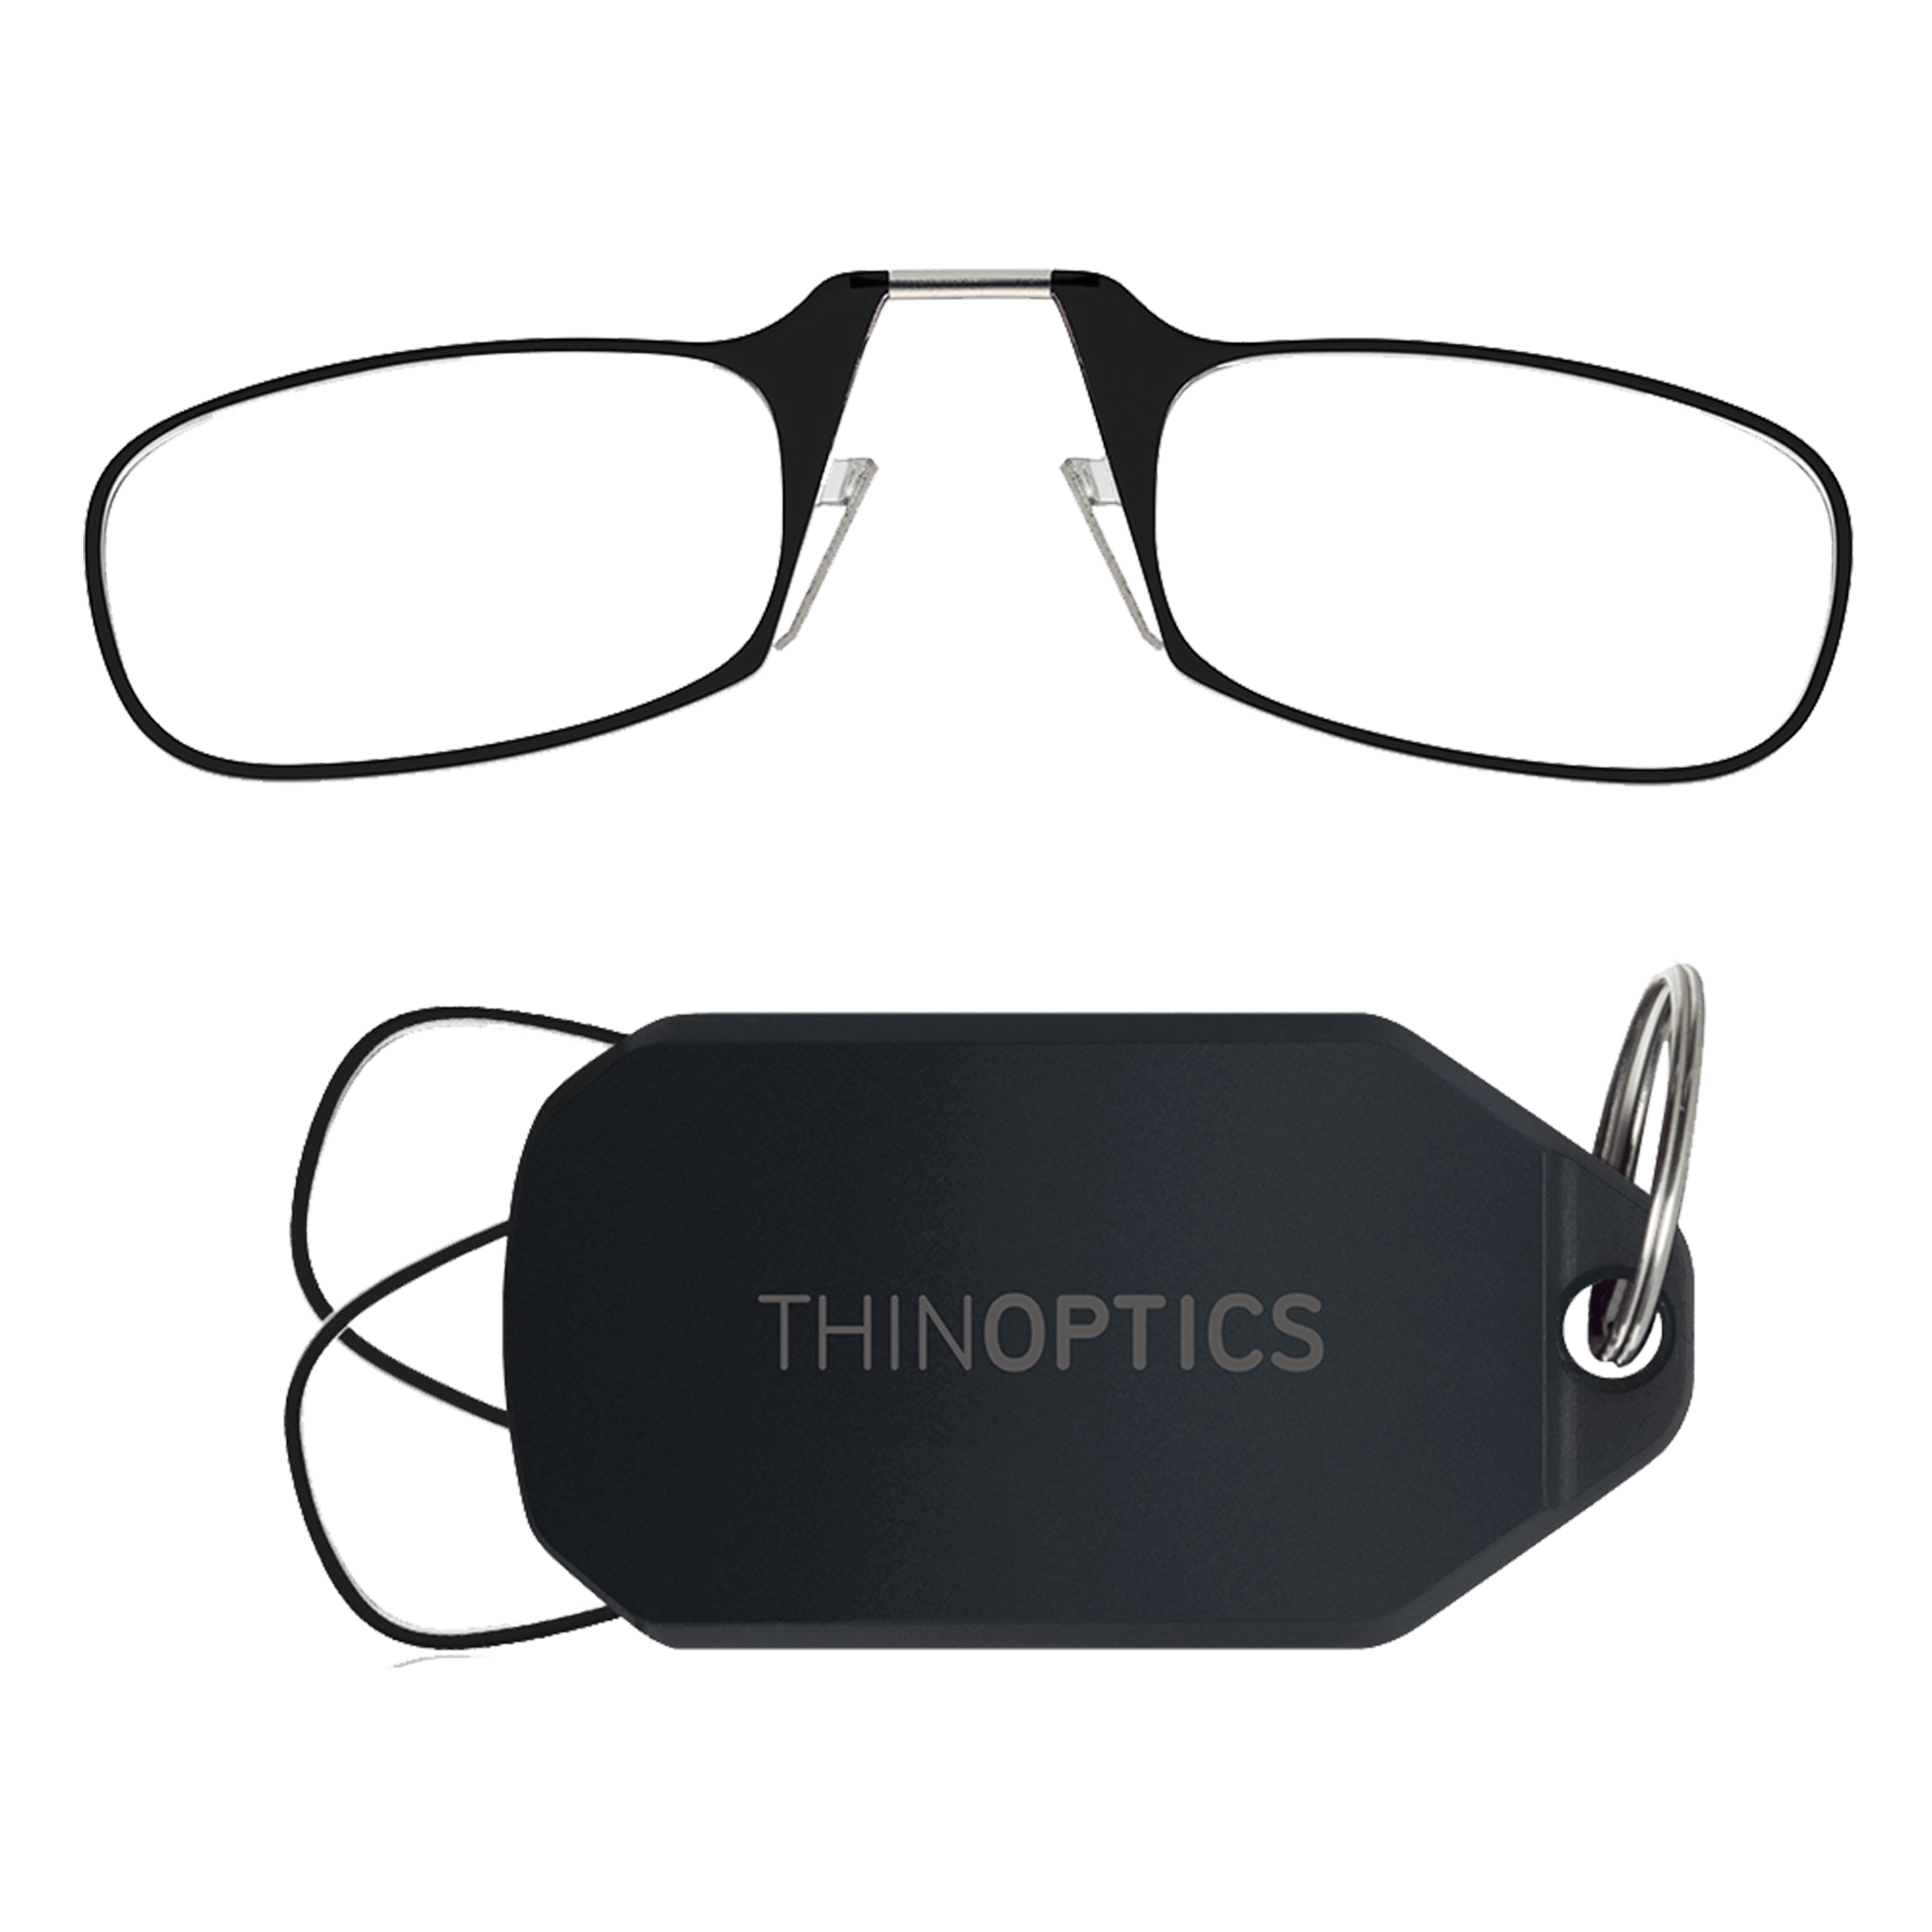 ThinOptics Review: Compact Reading Glasses - YouTube